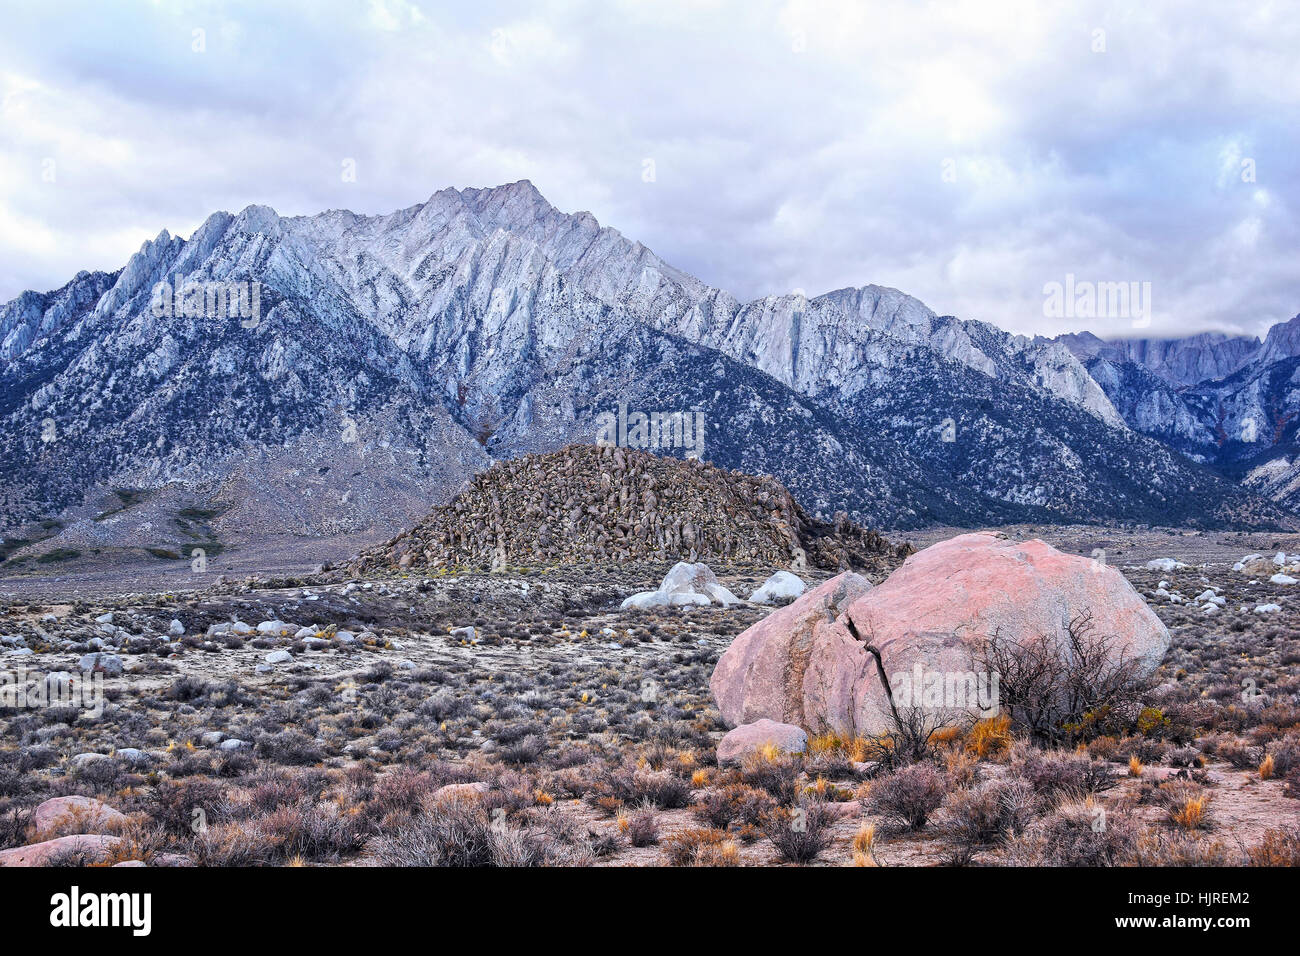 Sierra Nevada Mountains at Alabama Hills, close to the town of Lone Pine, California, USA. Rocks in foreground covered with red micro organisms. Stock Photo